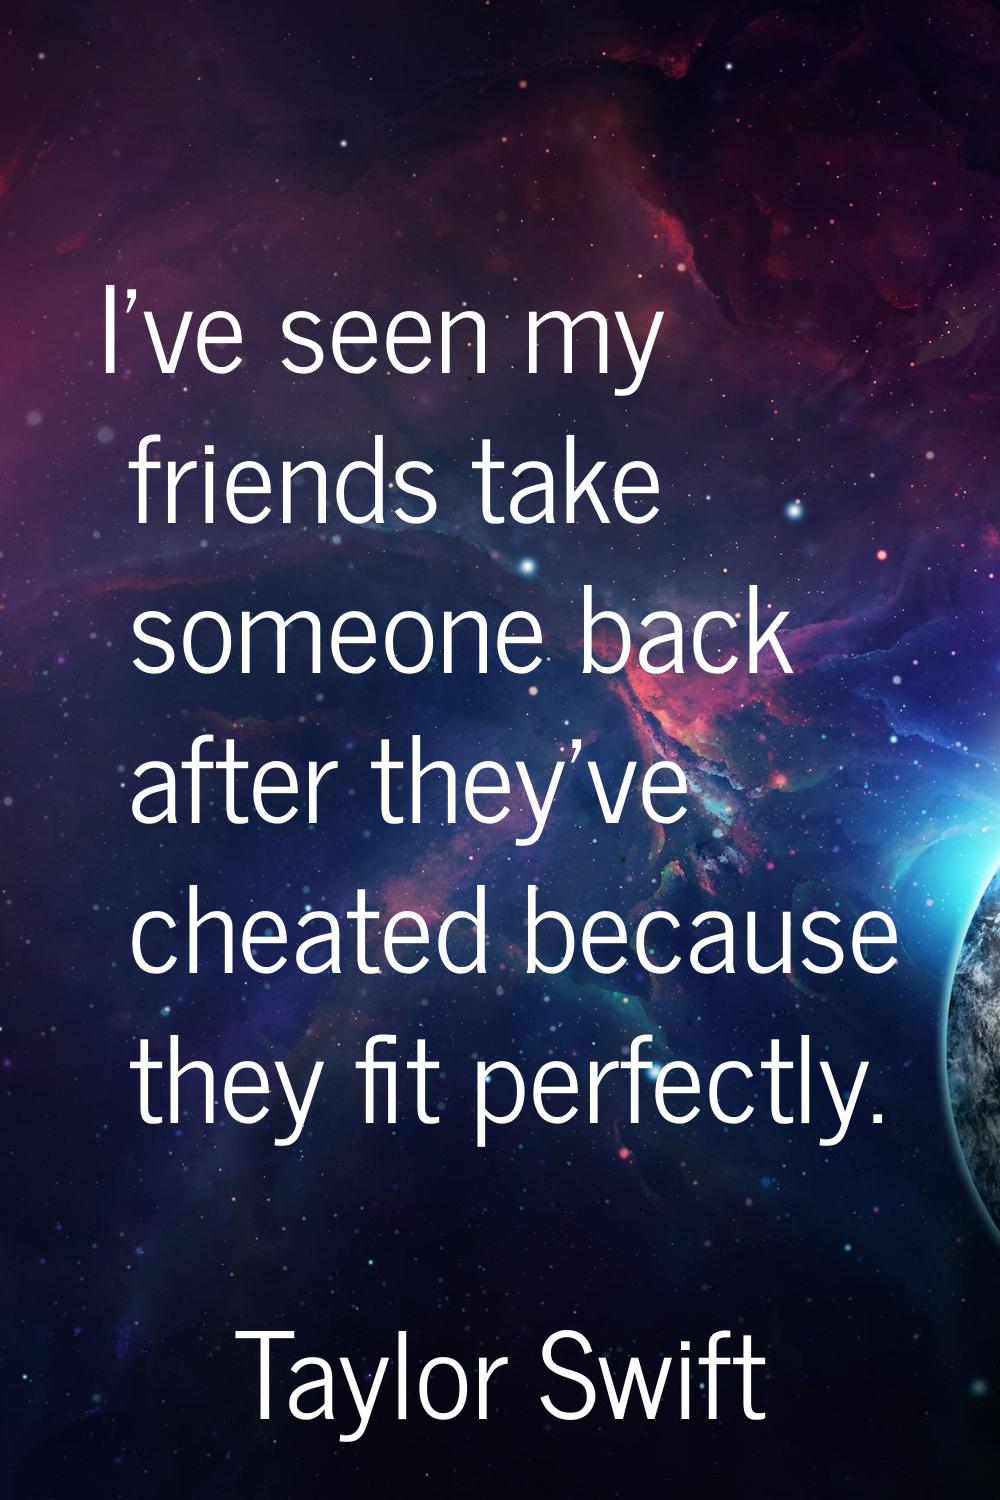 I've seen my friends take someone back after they've cheated because they fit perfectly.